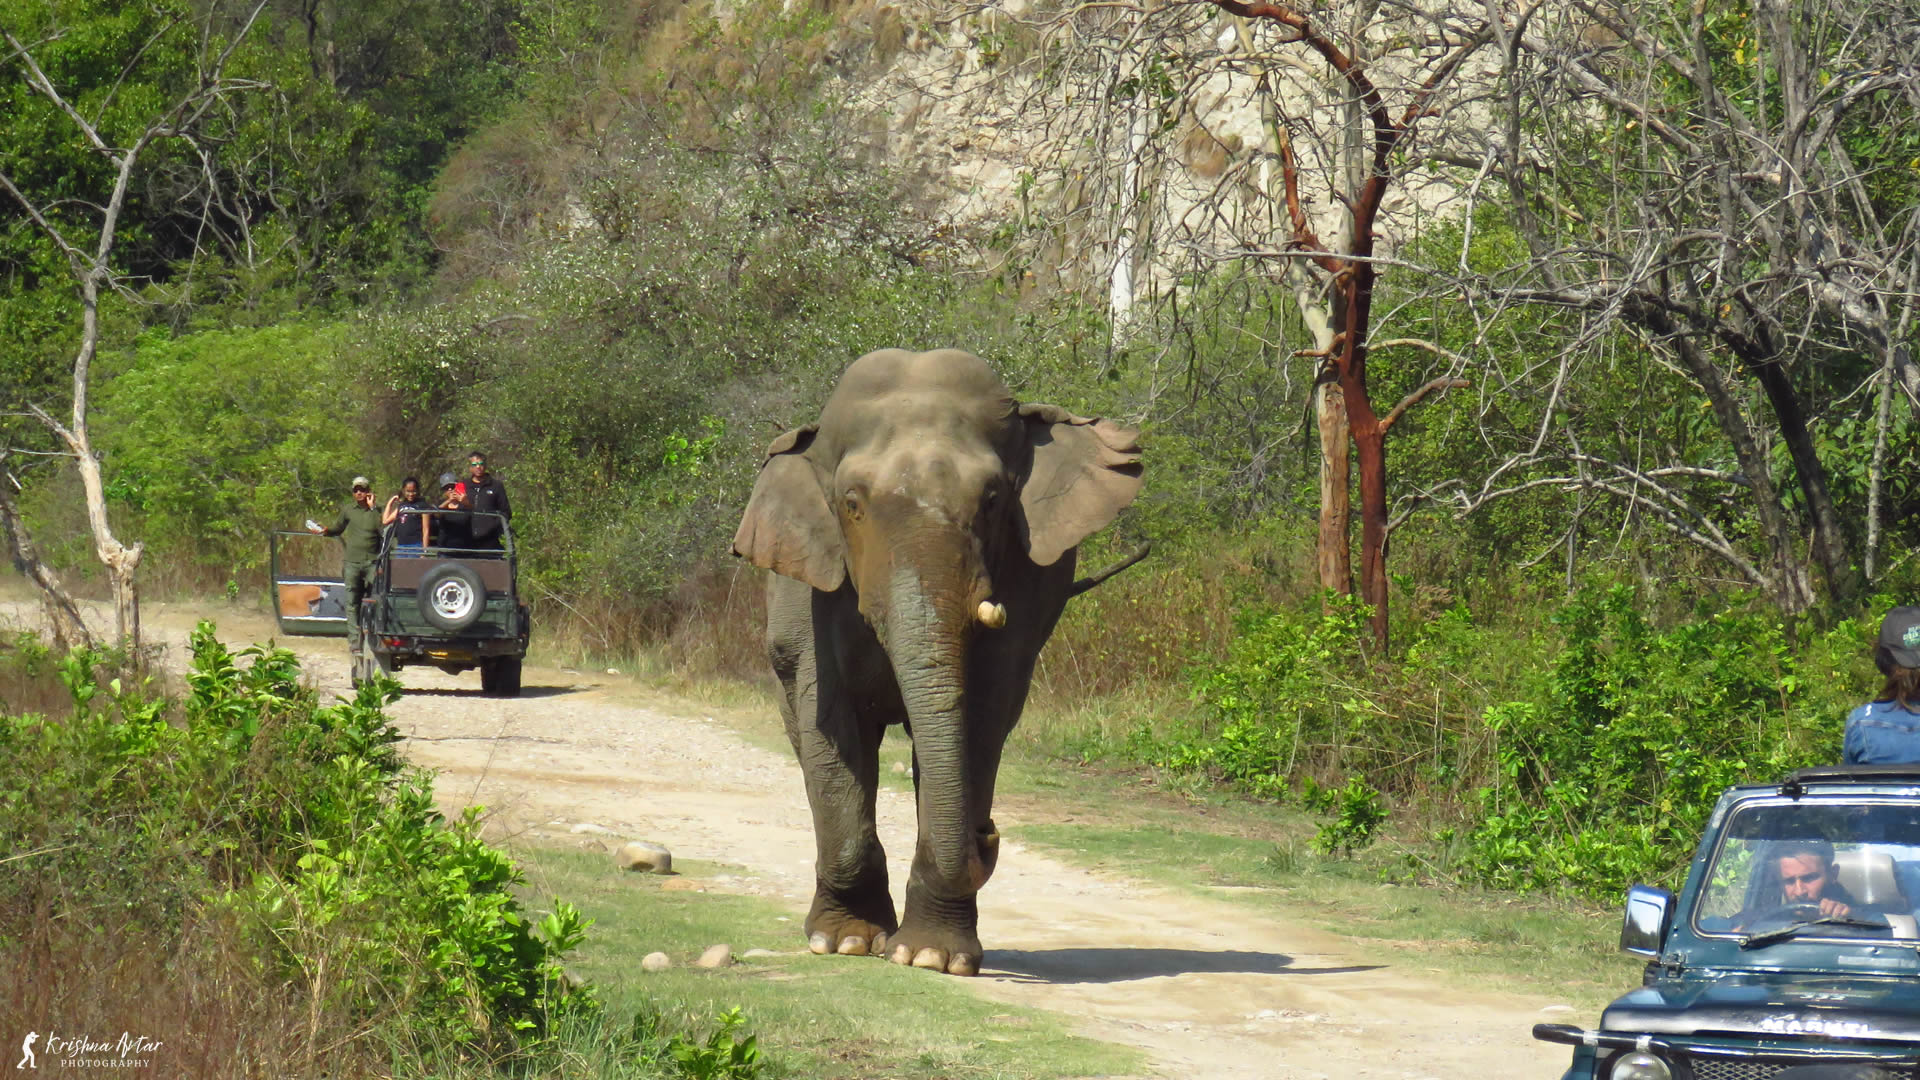 A majestic elephant strolling along a dusty road, showcasing its grandeur and strength.